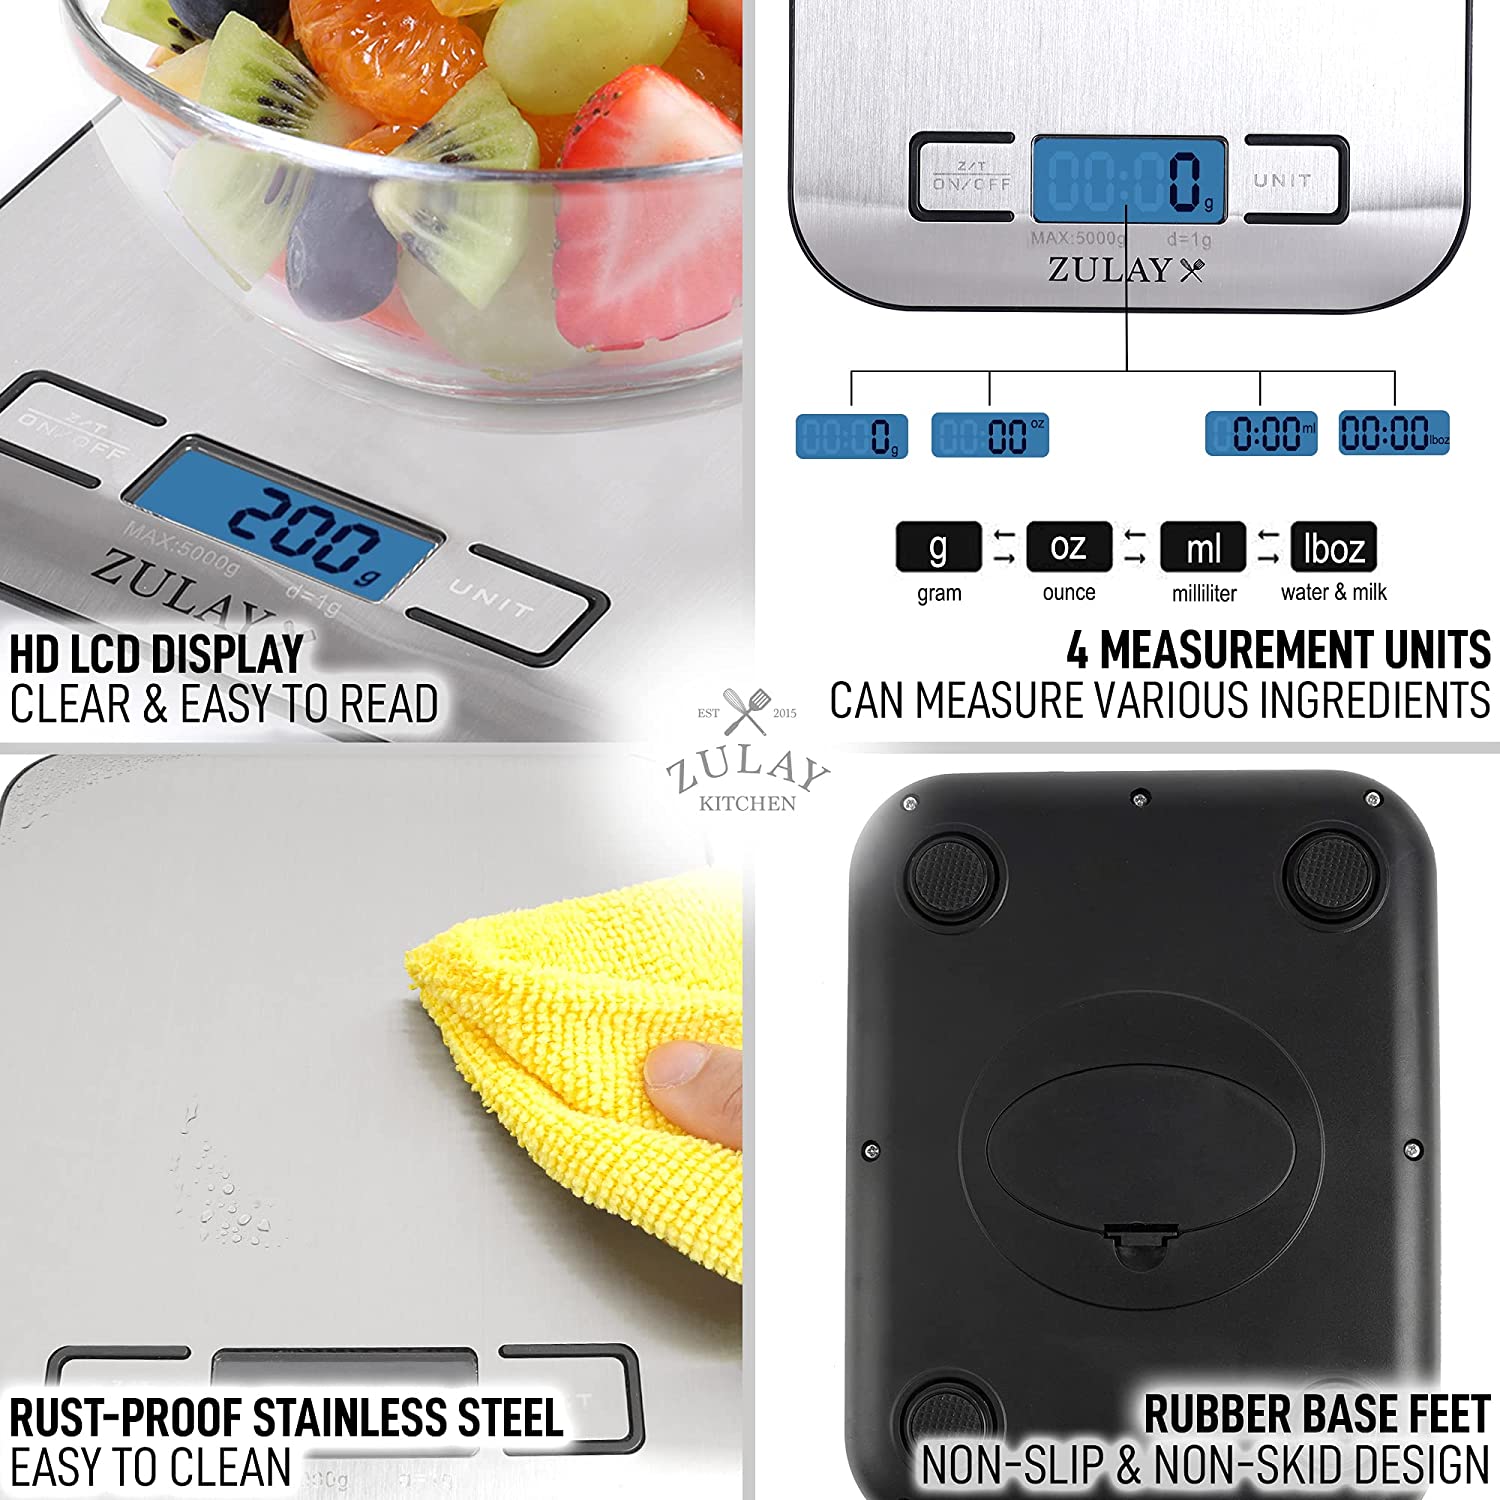 Precision Digital Food Scale Weight Grams and Oz, LB, KG, ML - Zulay KitchenZulay Kitchen